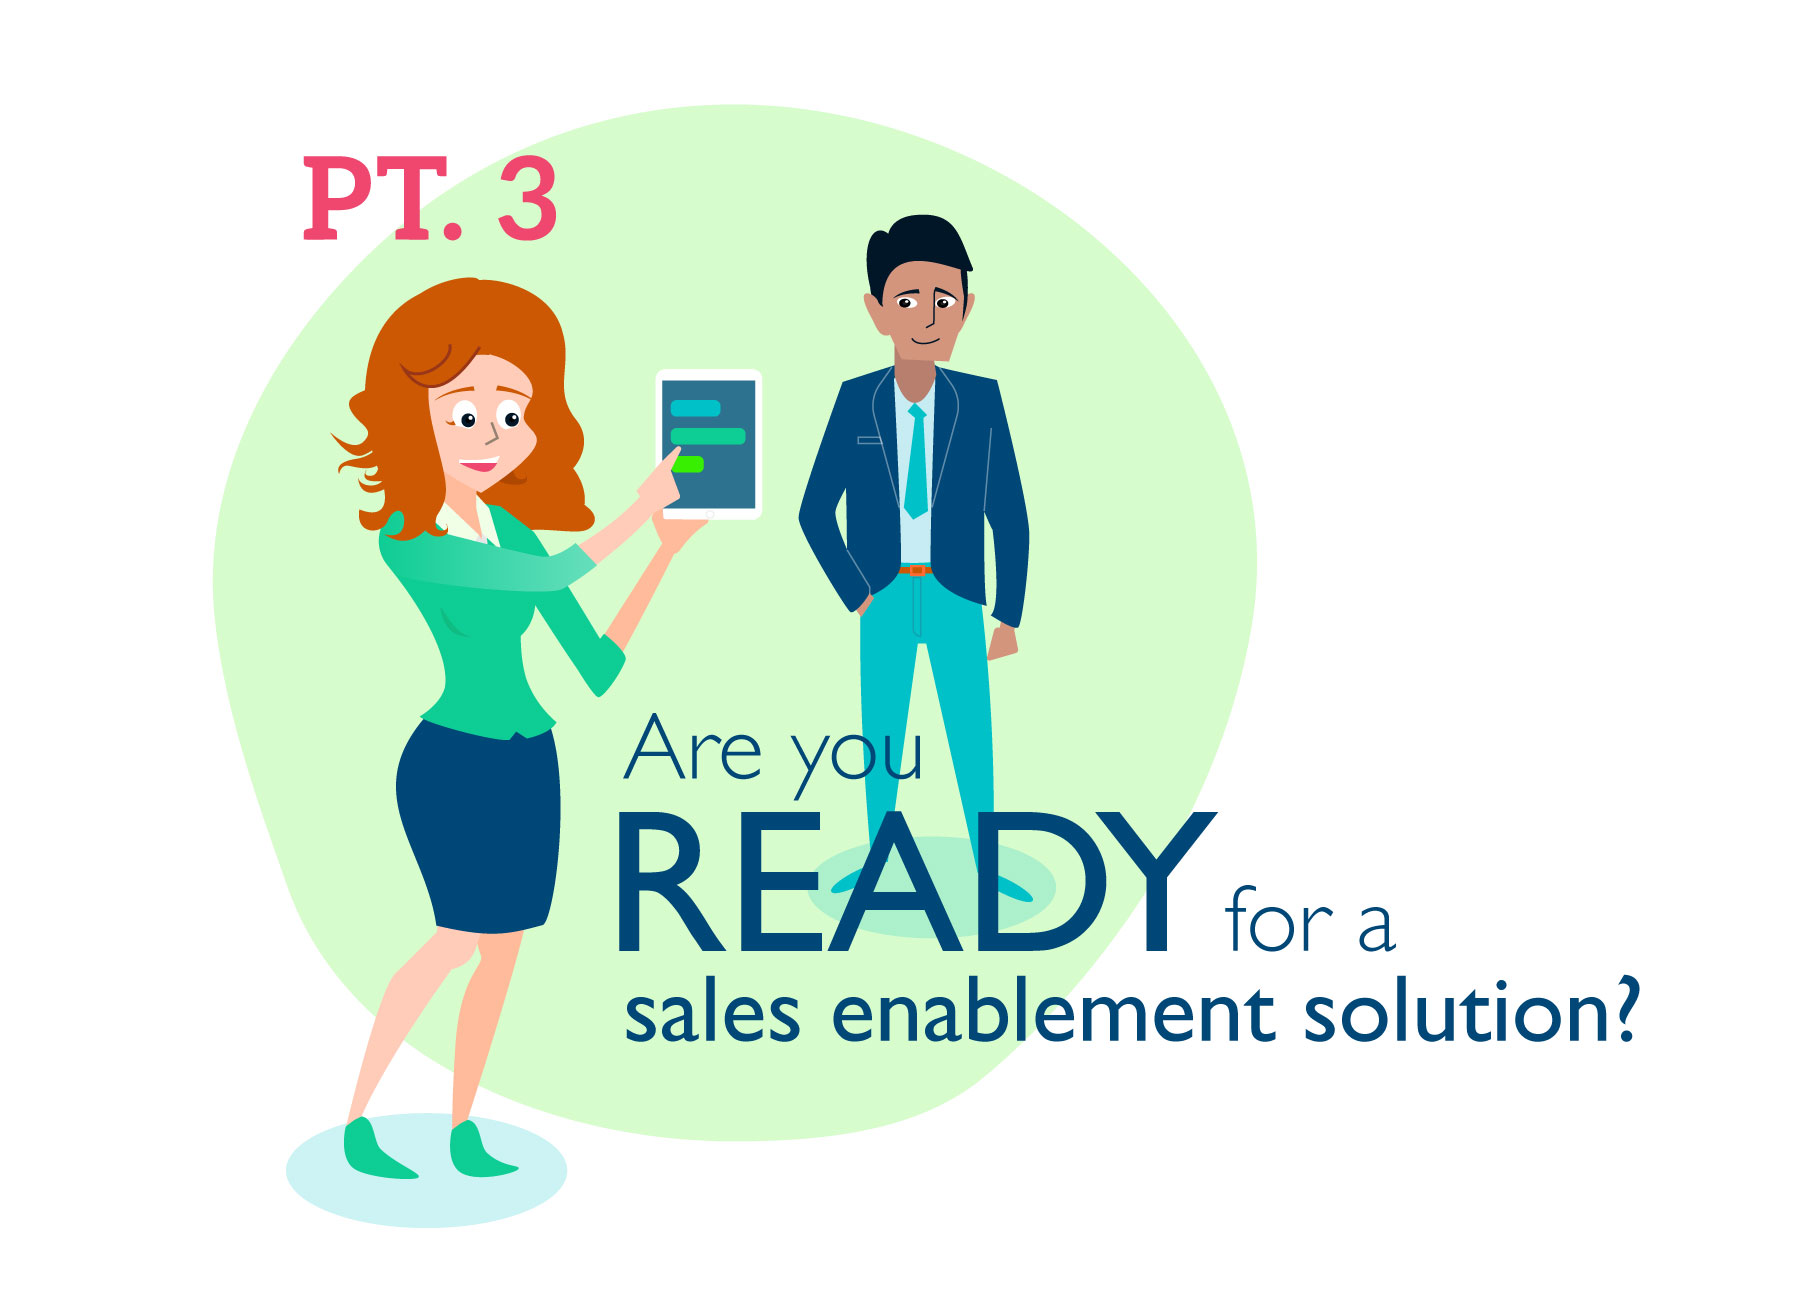 Are you ready for a sales enablement solution part 3